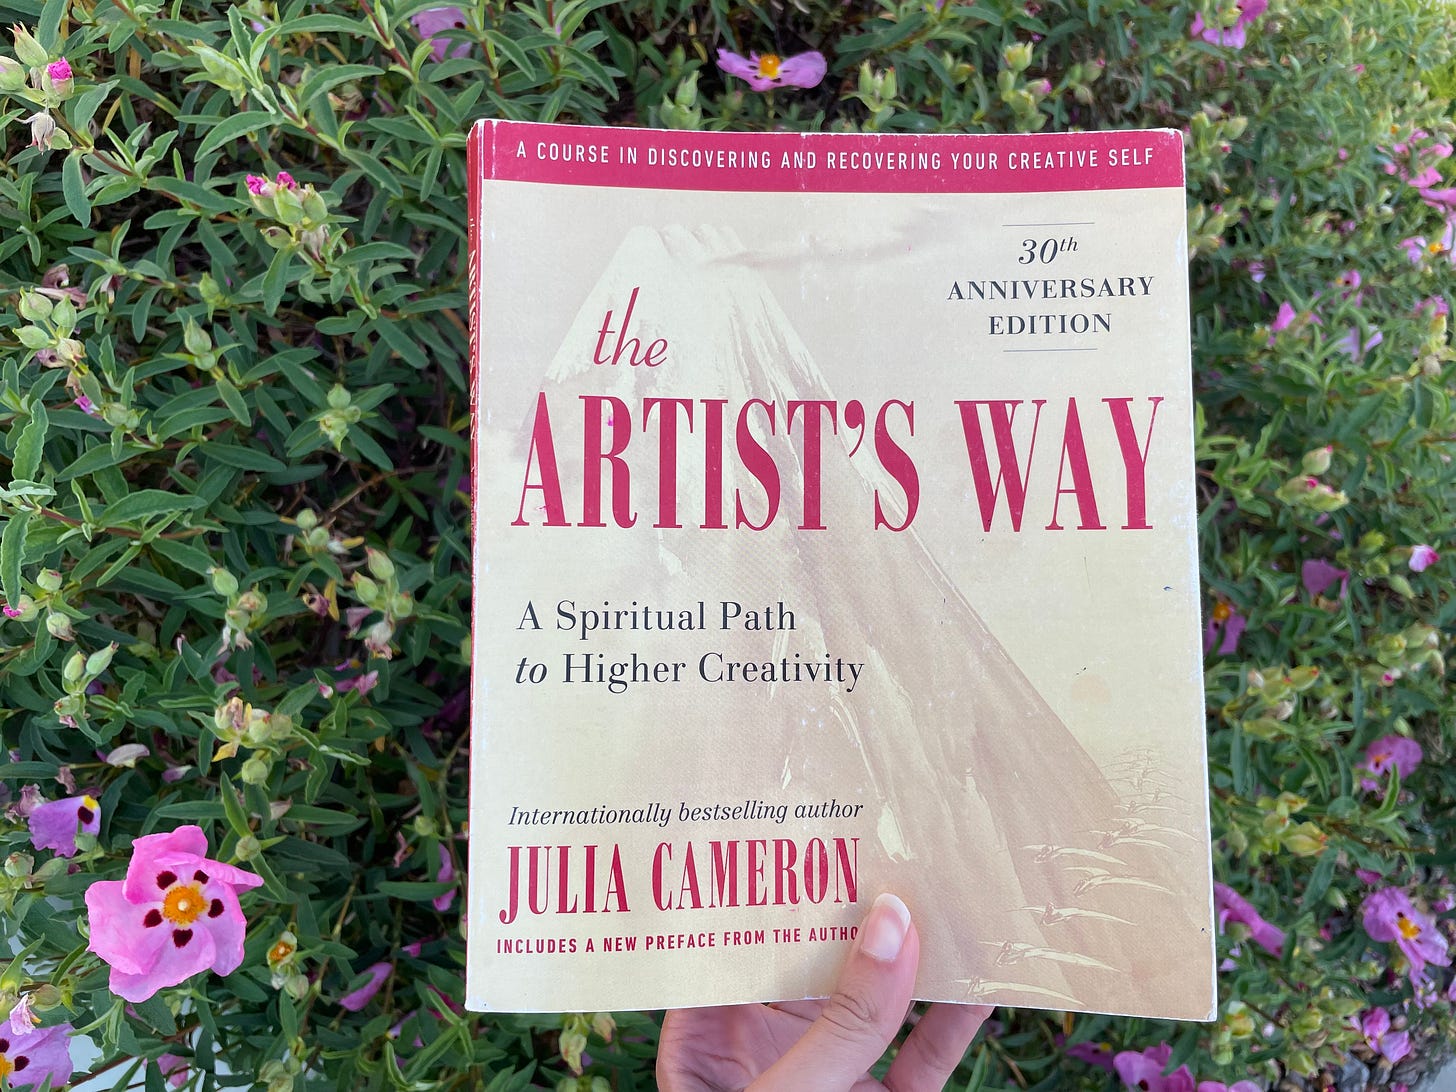 A copy of Julia Cameron’s book, The Artist’s Way, which has a light yellow cover with black and red text. The book is held up in front of a bush that has pink flowers blossoming from it.